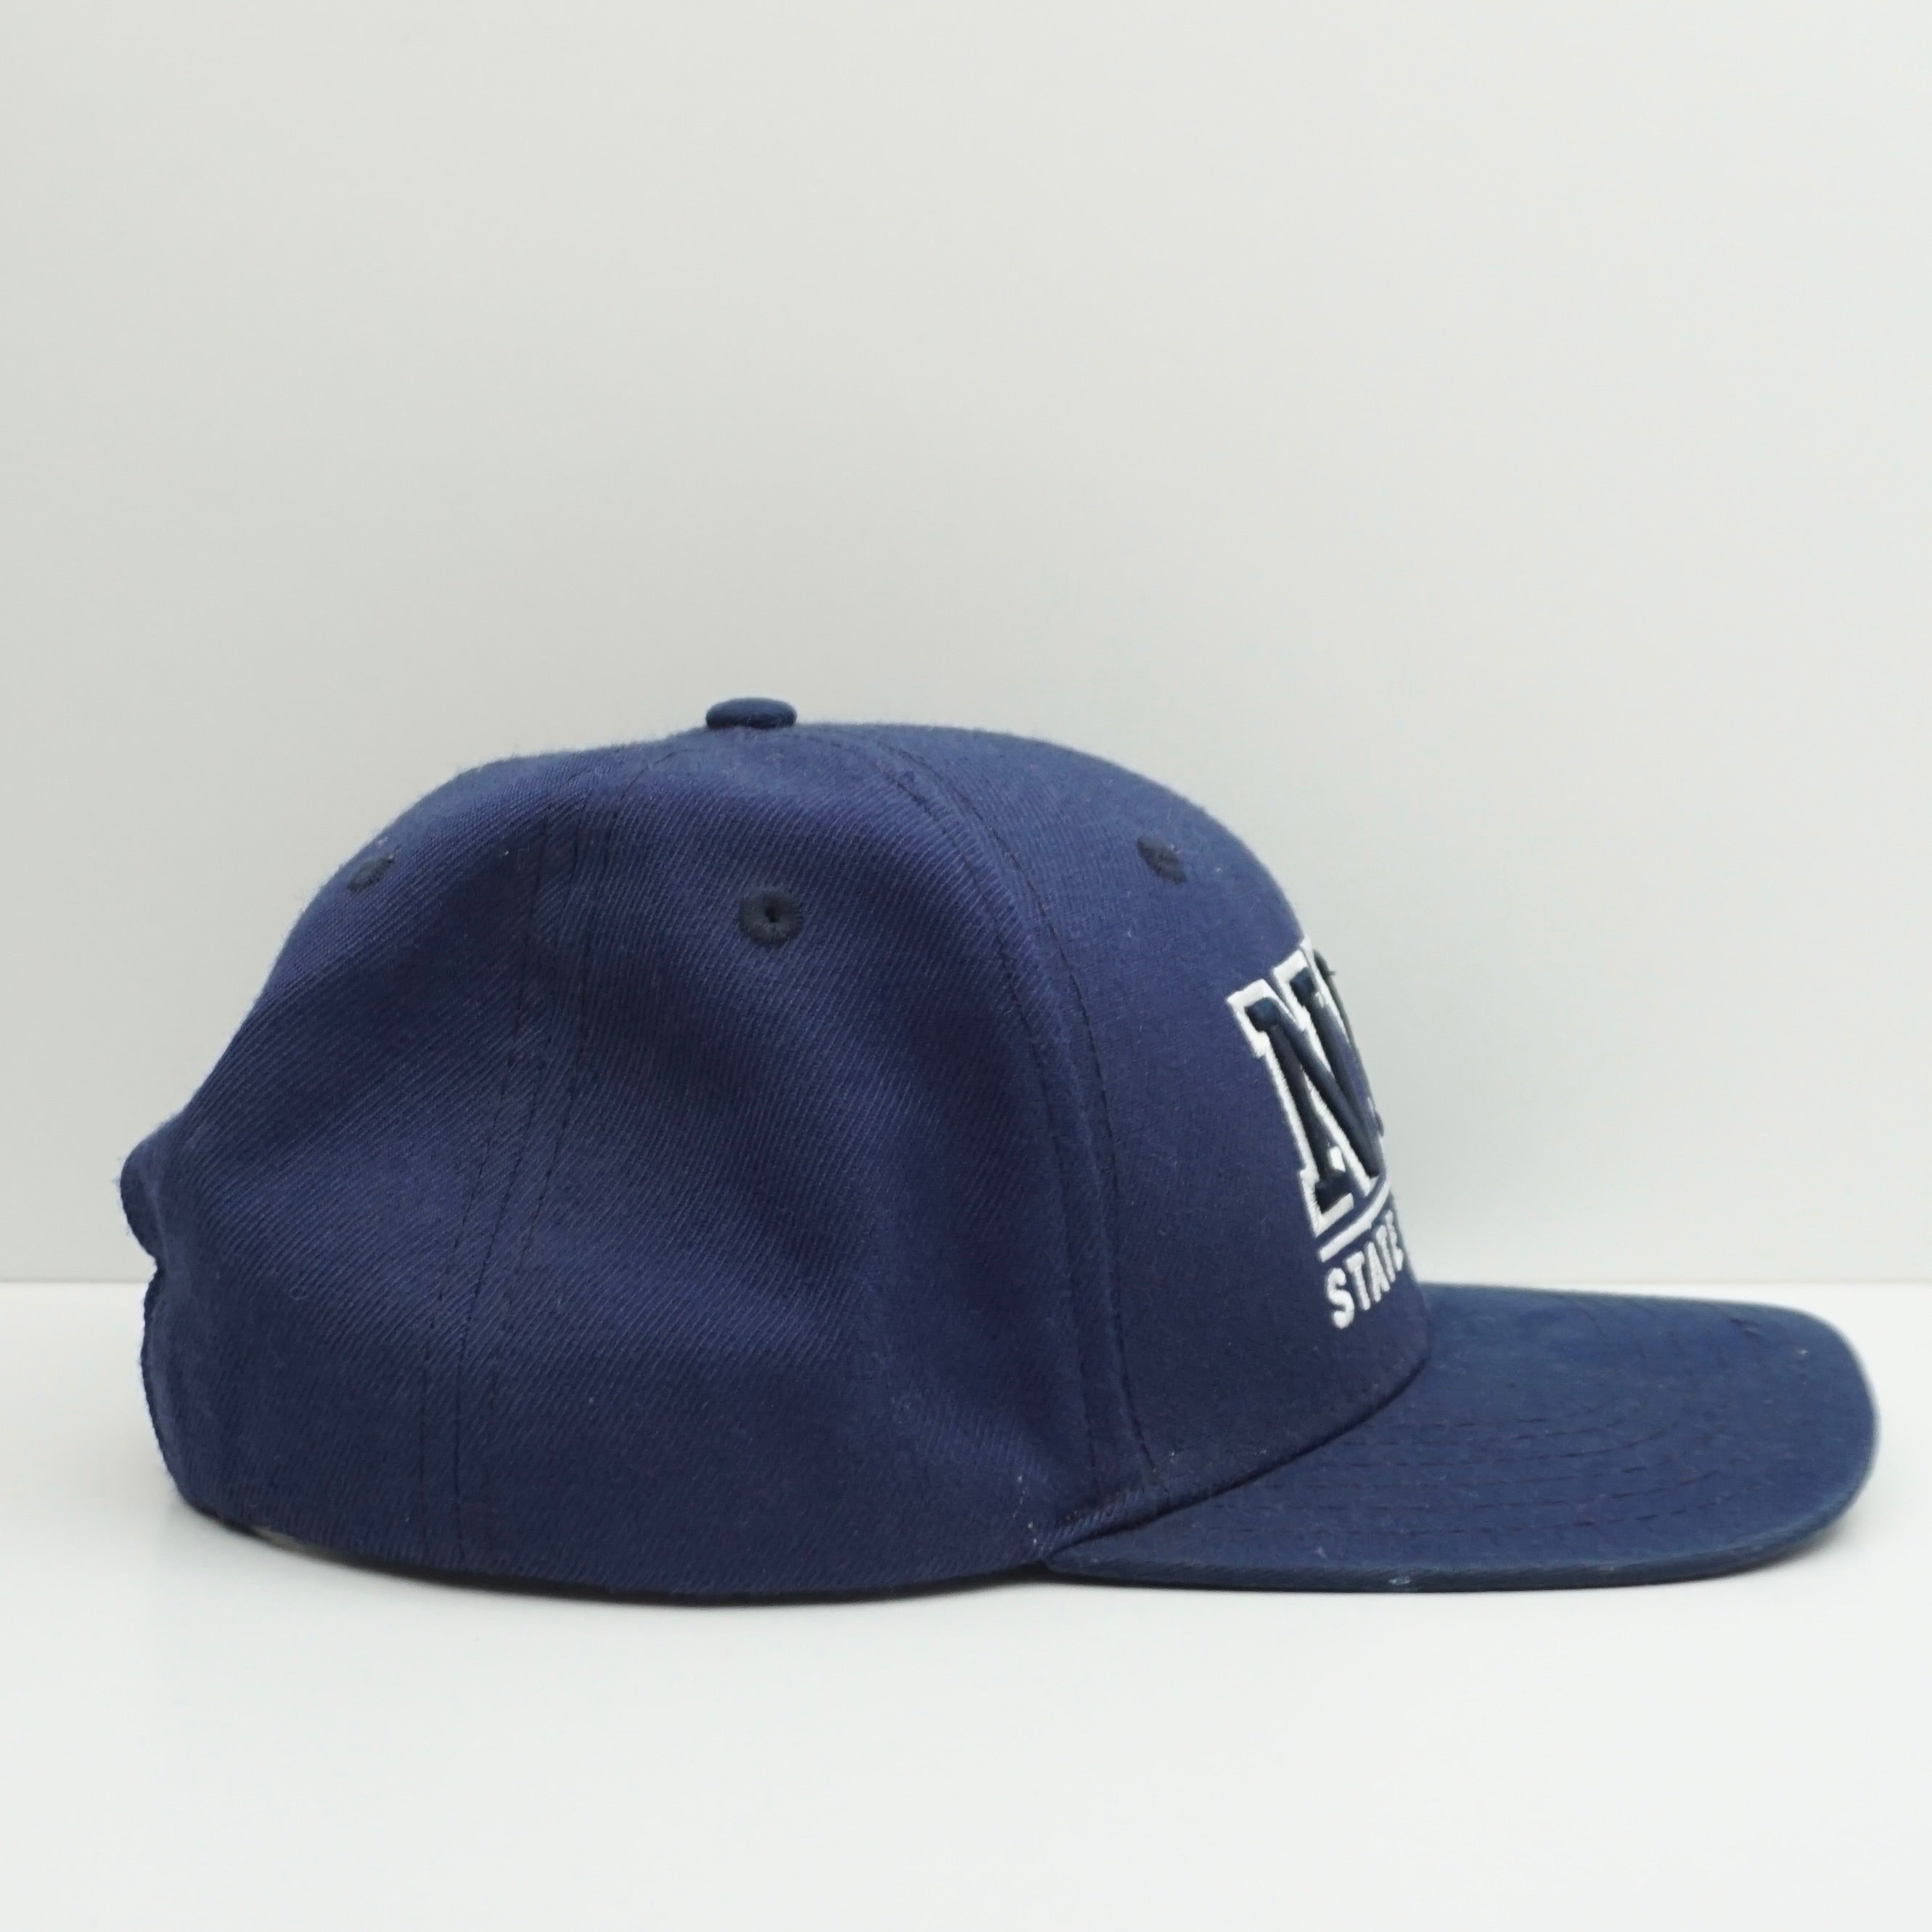 NYC State Of Wow Navy Snapback Cap